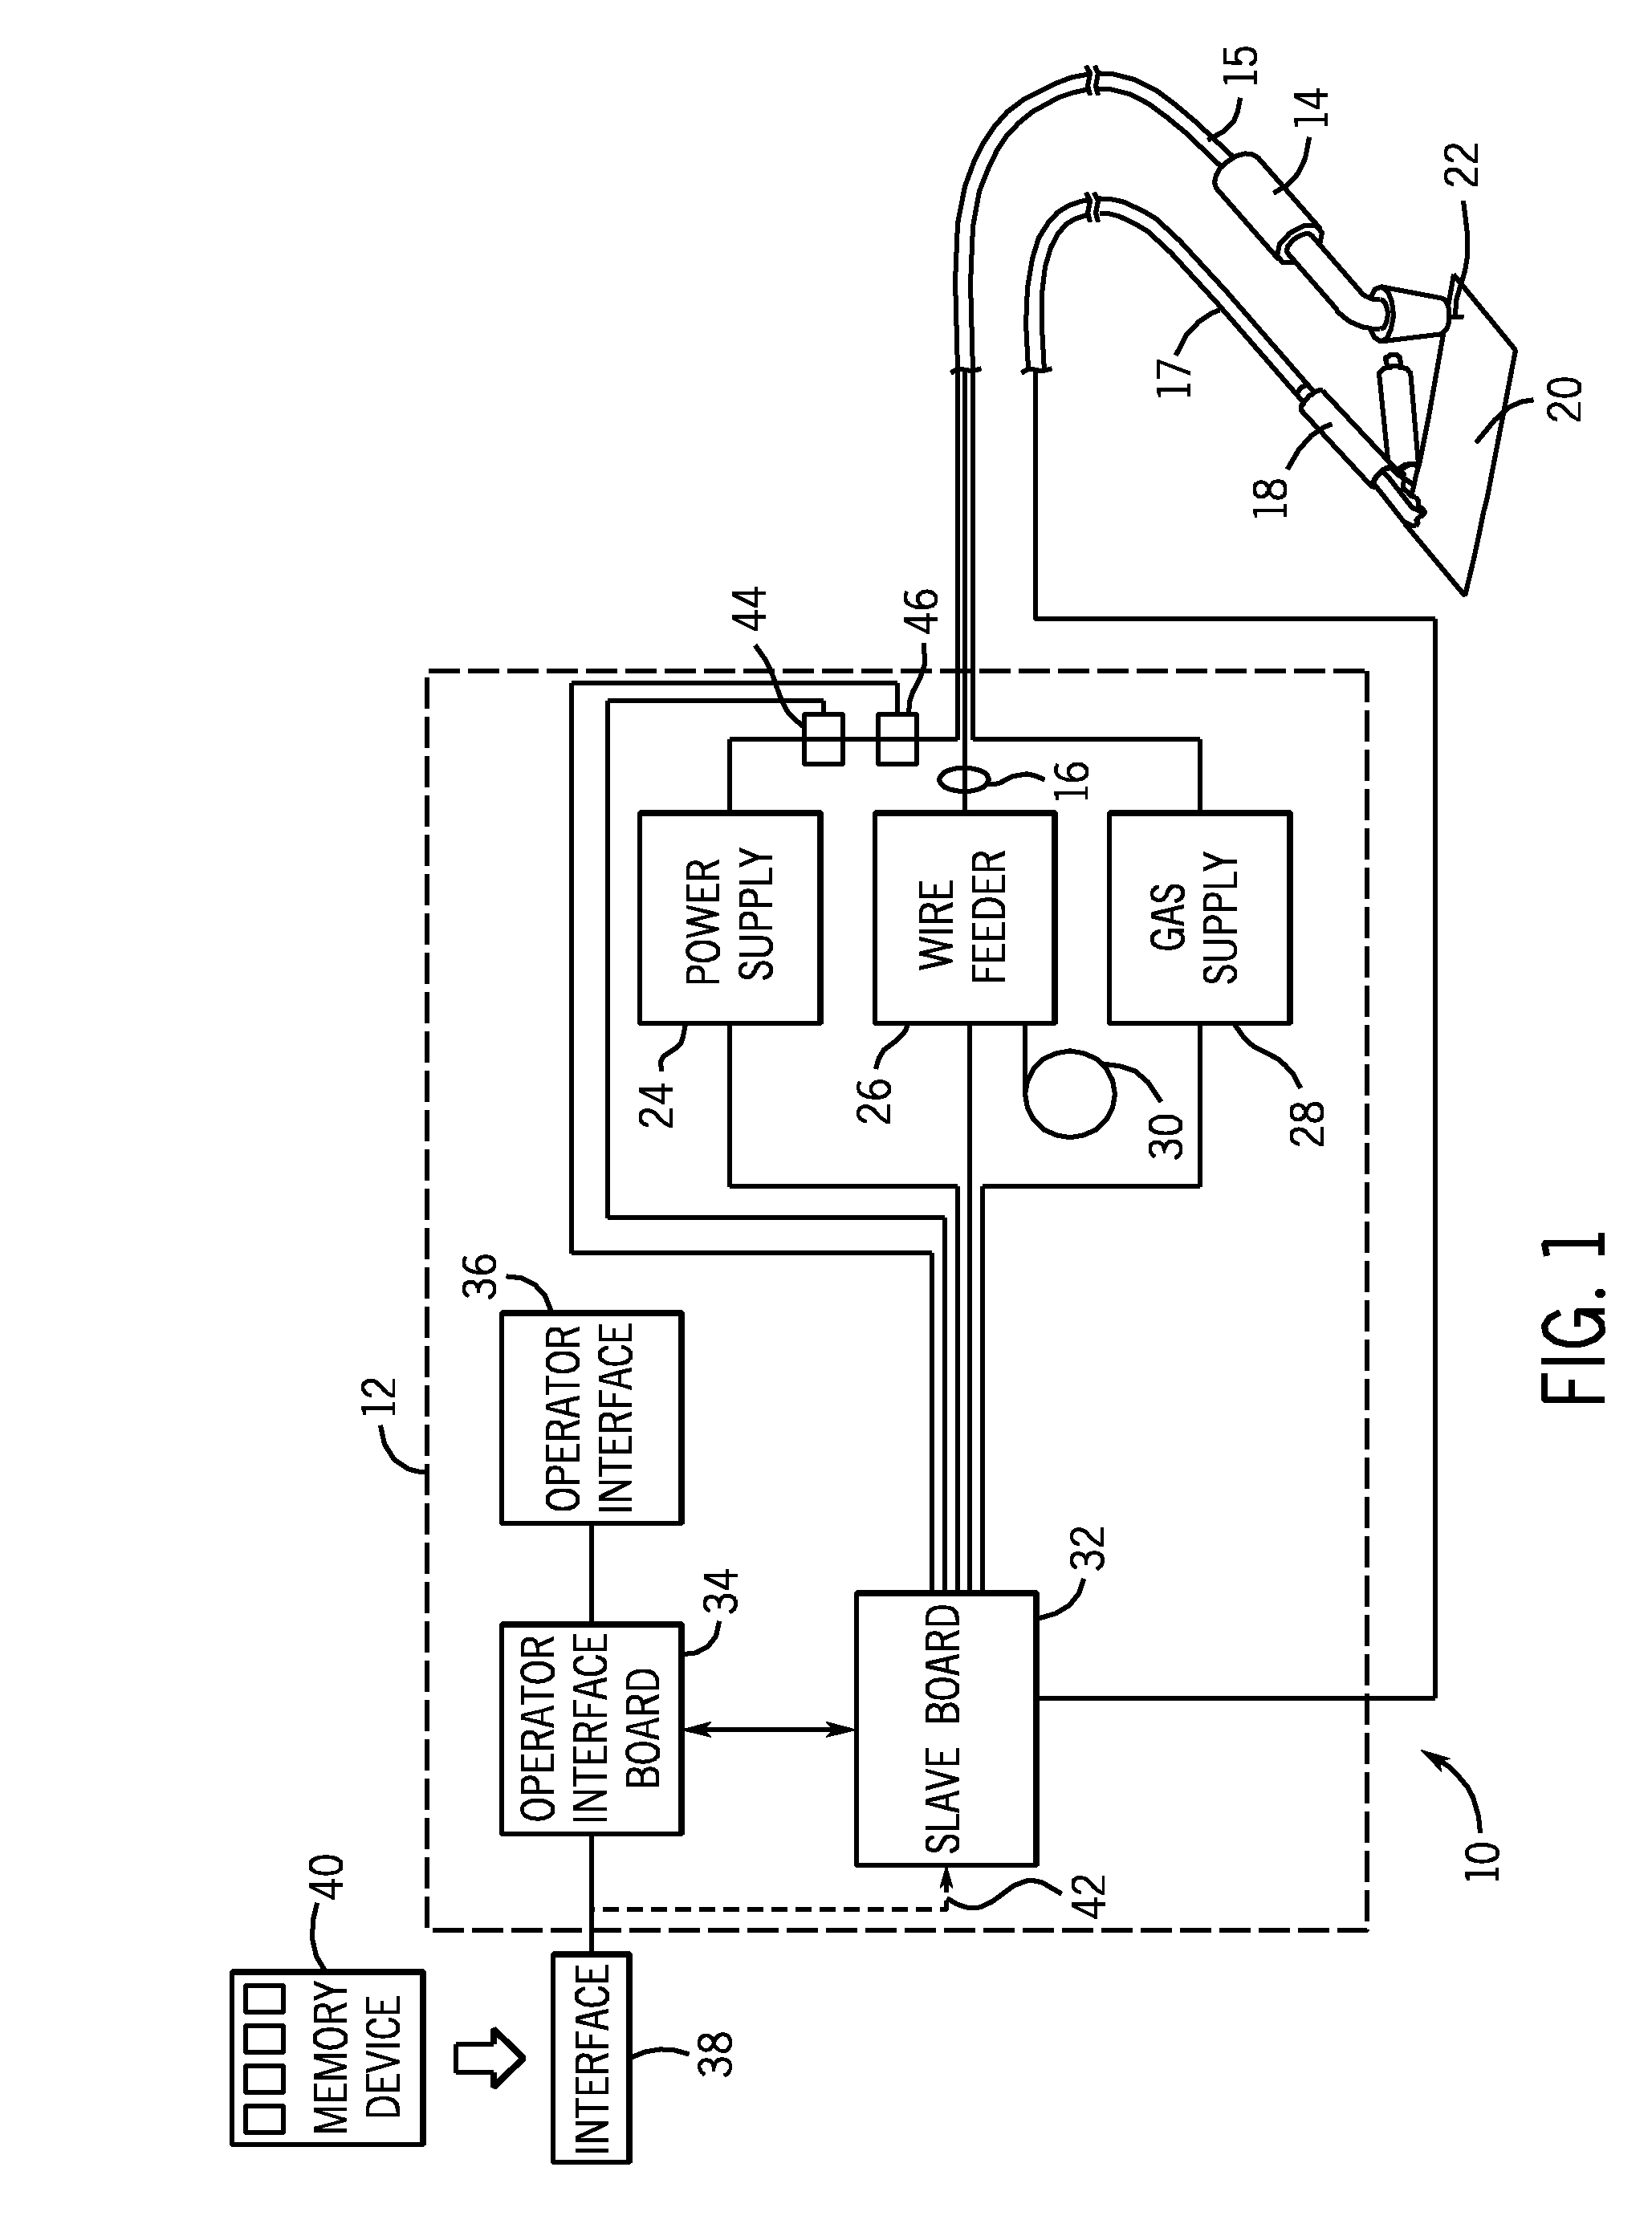 Embedded firmware updating system and method